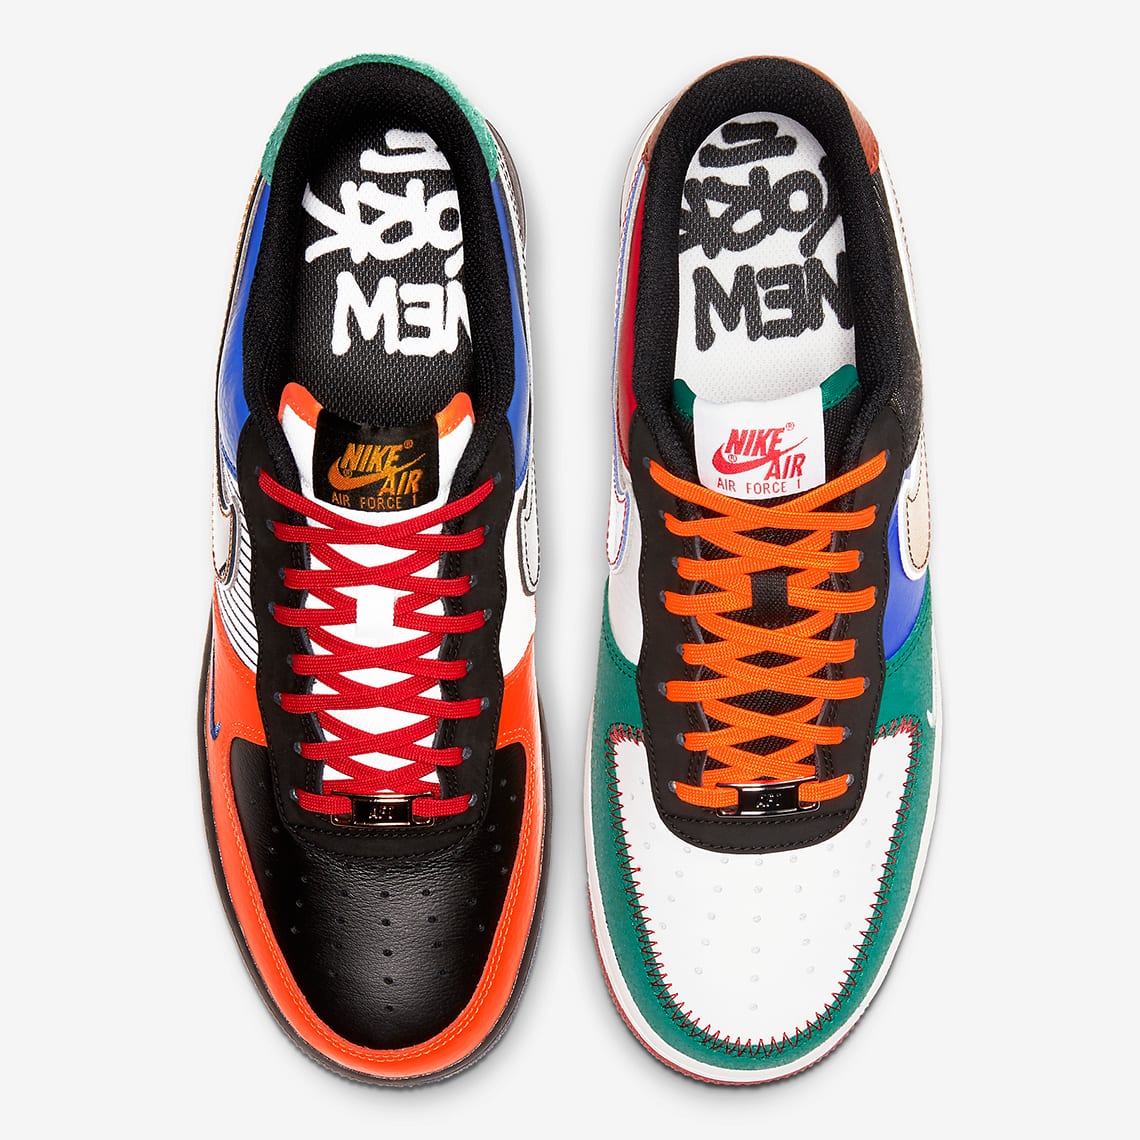 Big Apple Ballin': Nike Air Force 1 Low “What The NY” - The Source